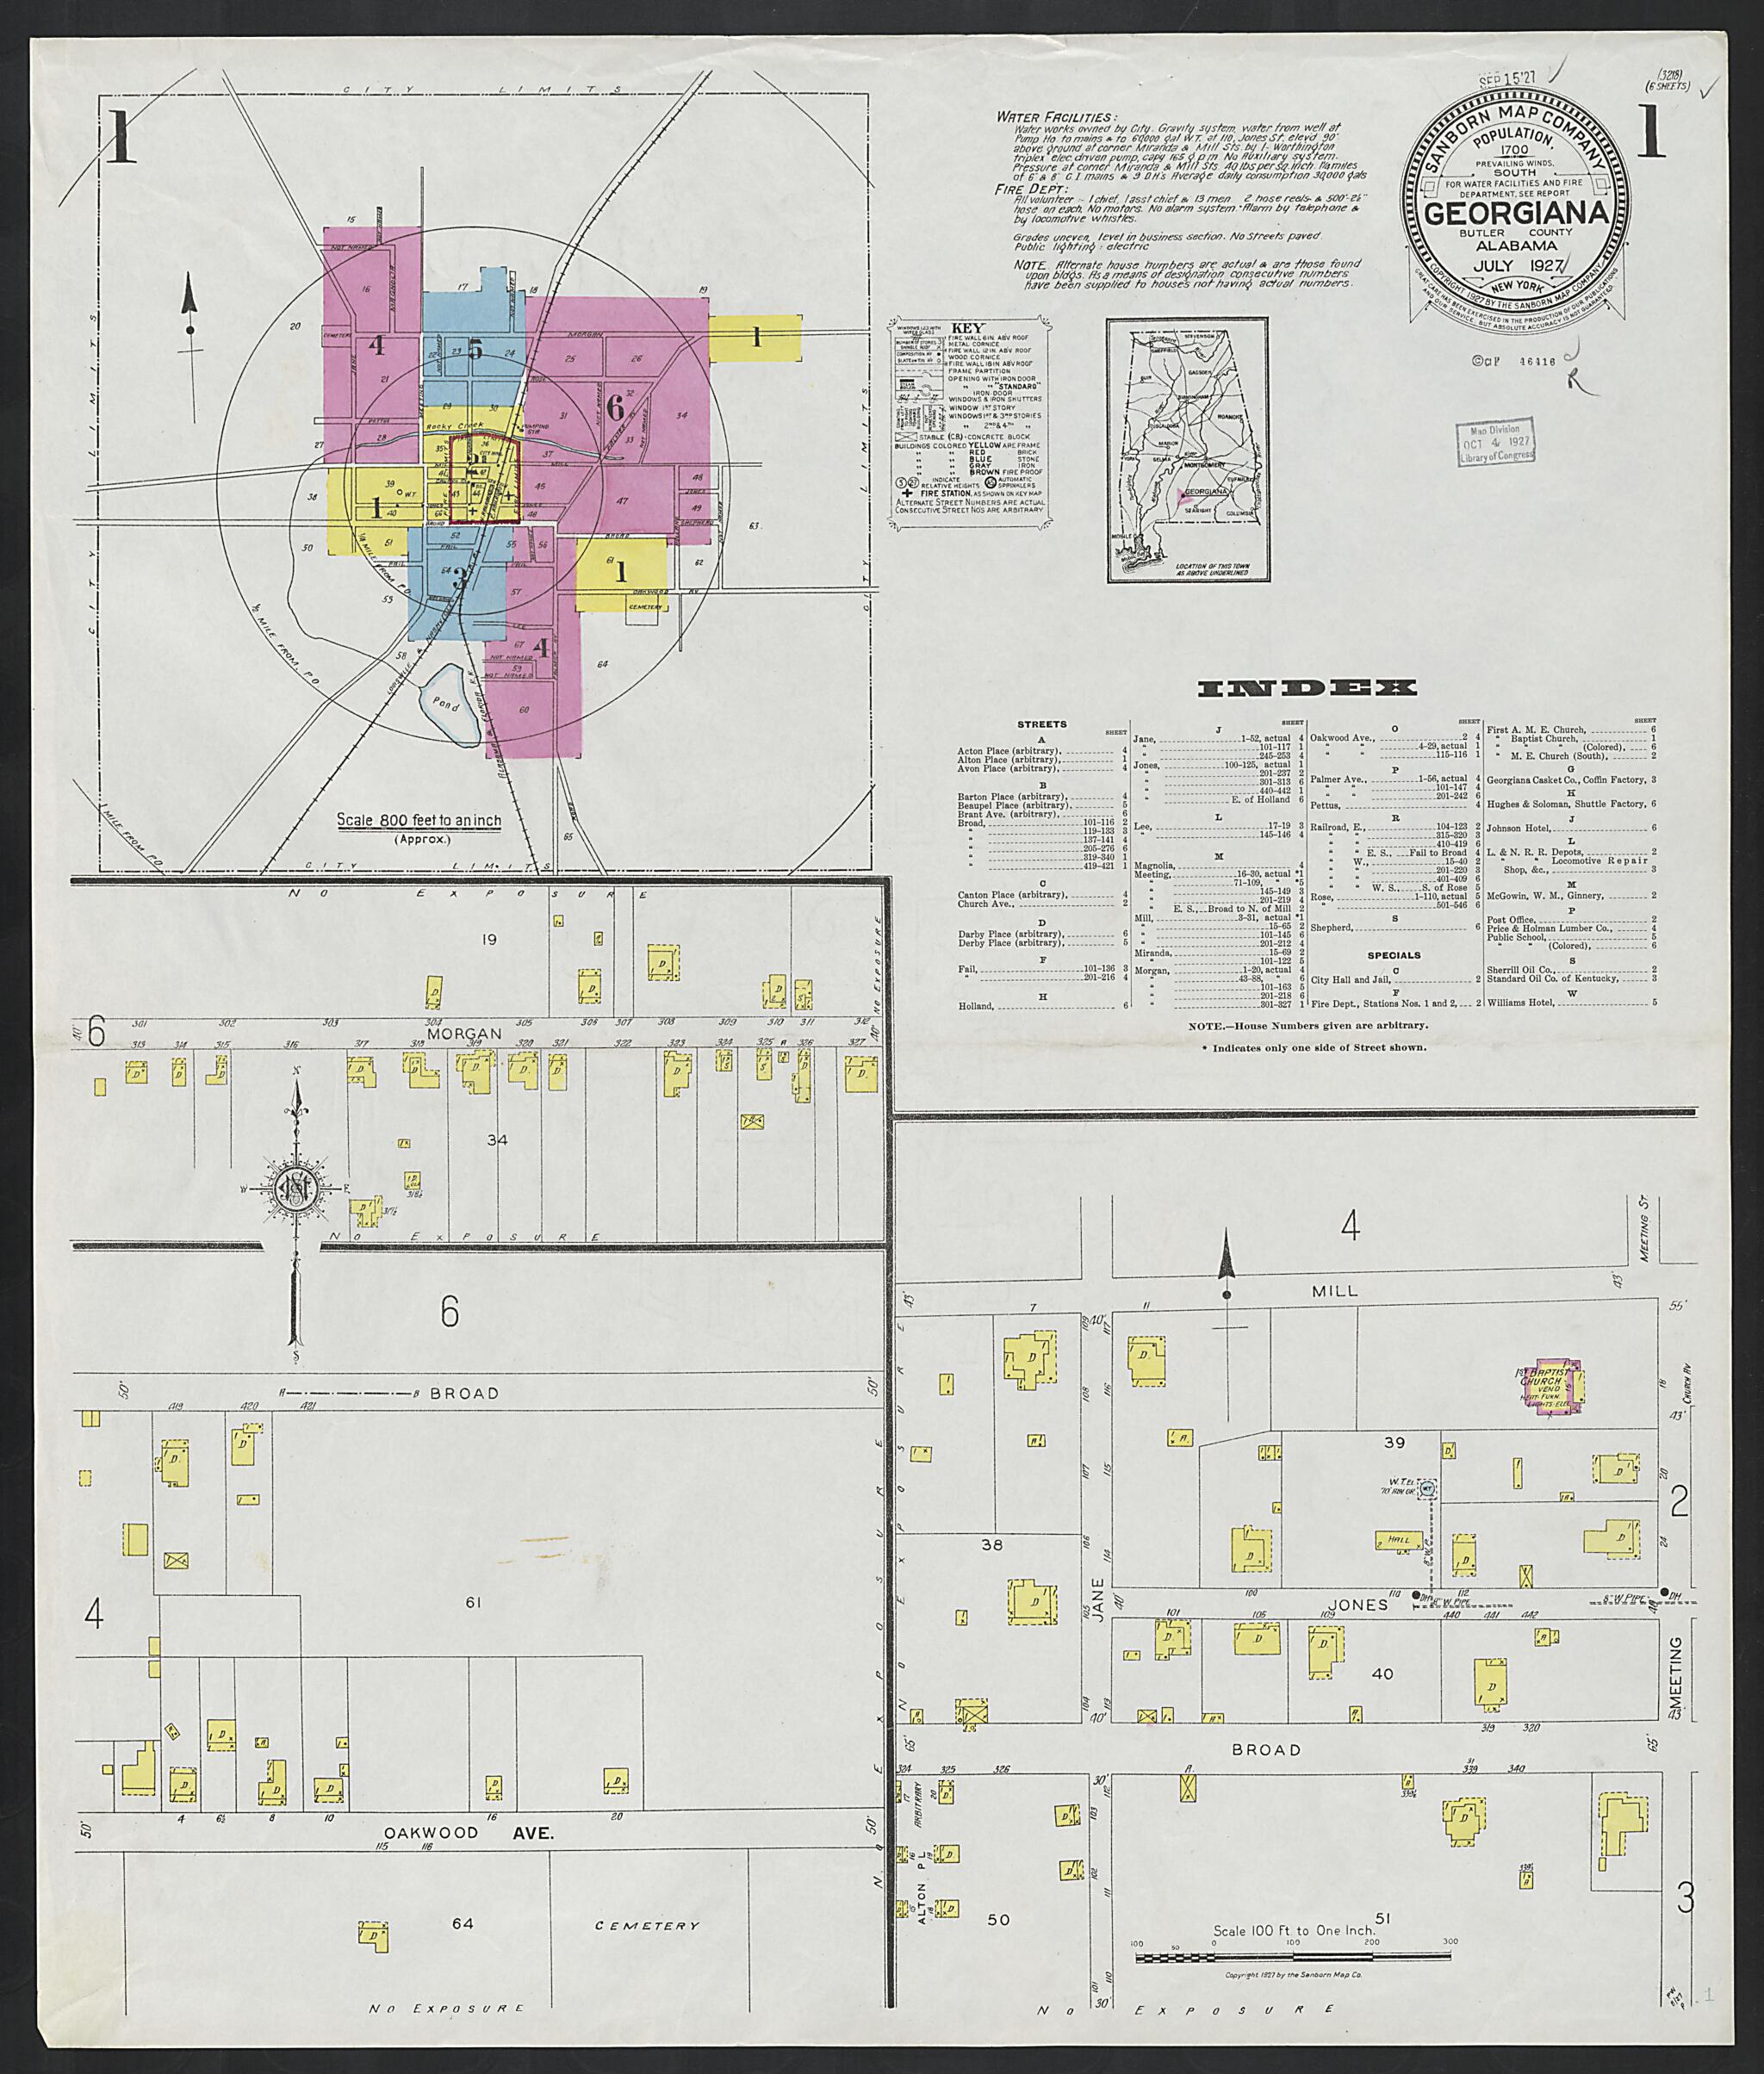 This old map of Georgiana, Butler County, Alabama was created by Sanborn Map Company in 1927